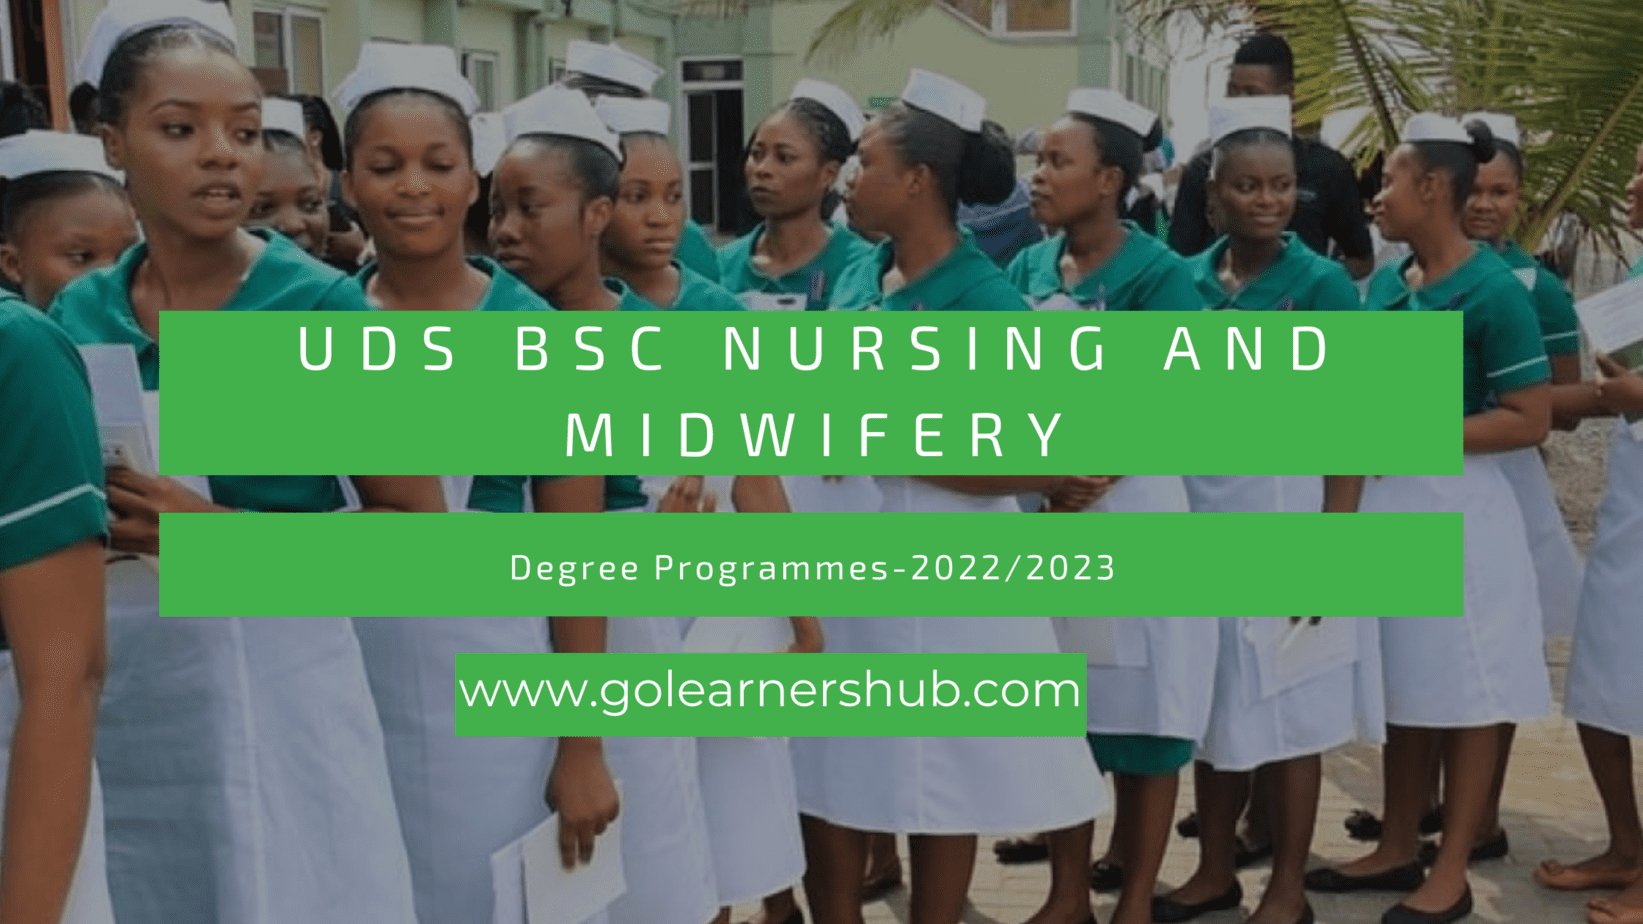 UDS Bsc Nursing and Midwifery Degree Programmes2023/2024